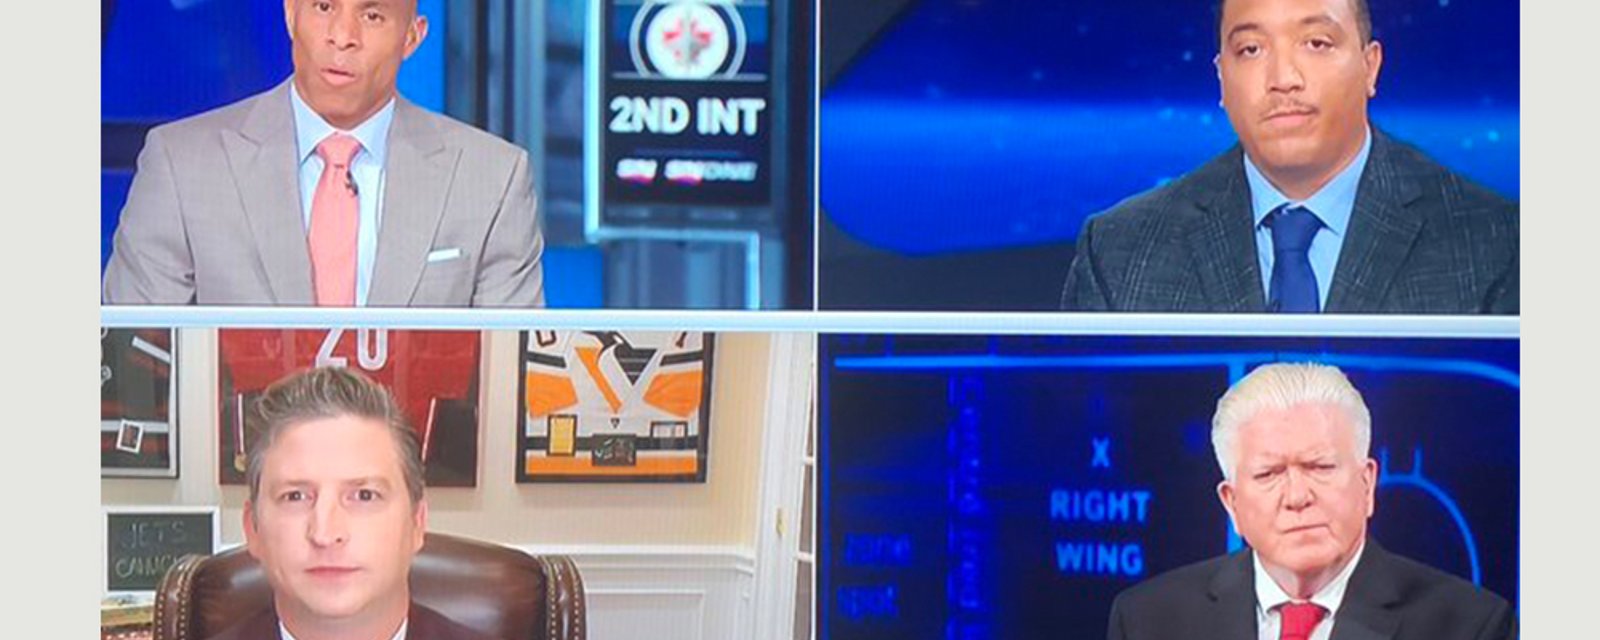 Brian Burke puts his foot in his mouth on live air, Sportsnet team is just stunned